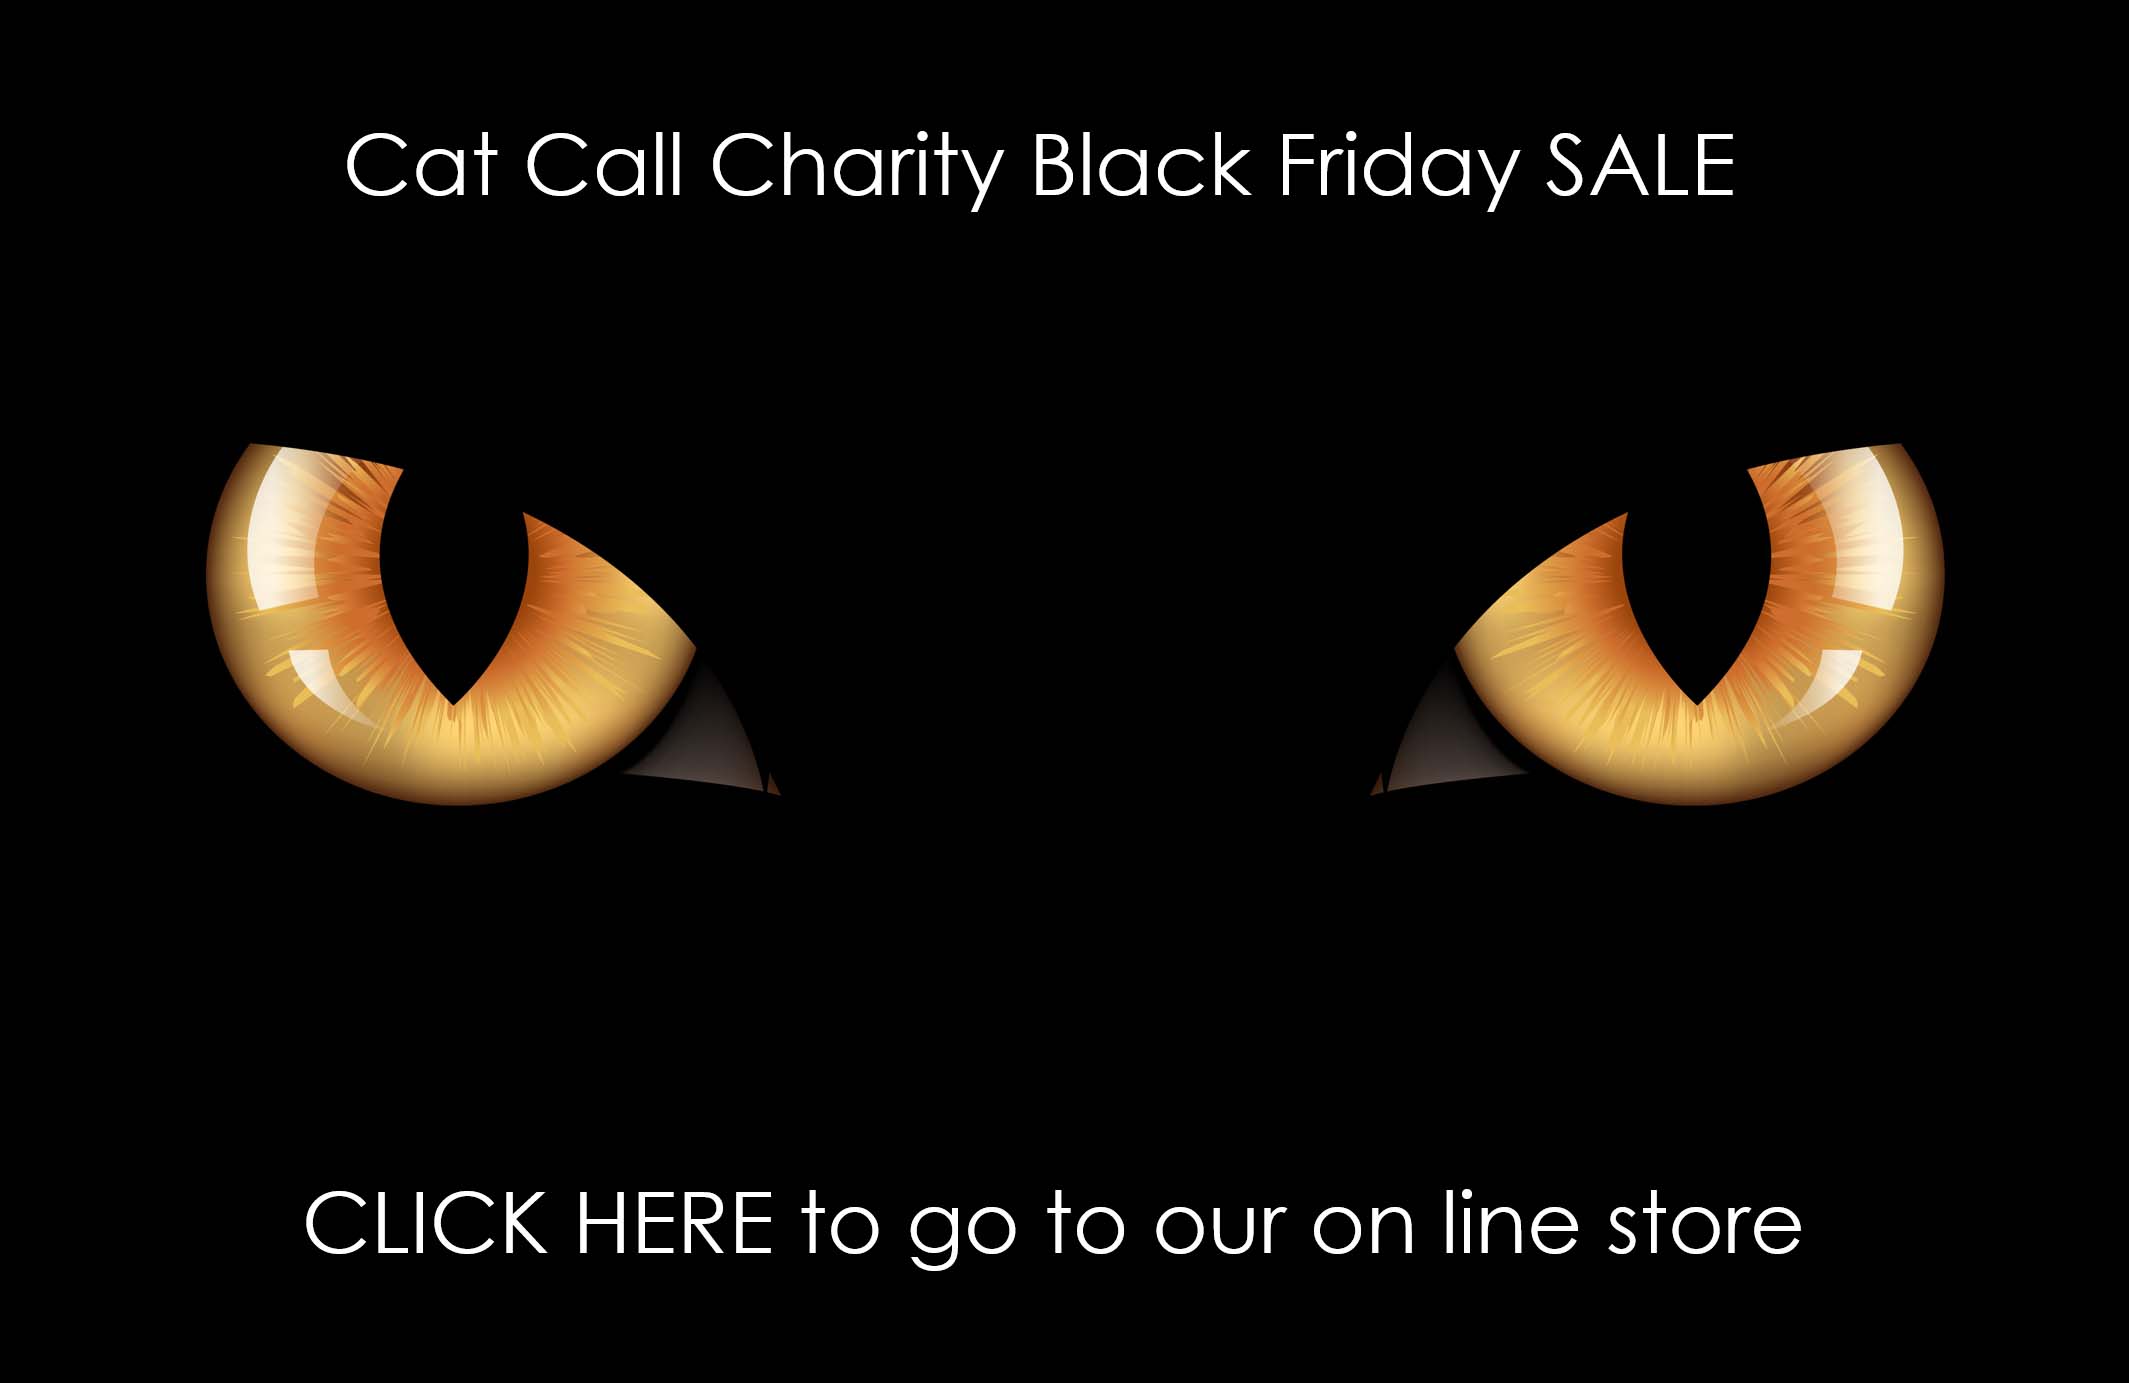 Our Cat Call Black Friday On Line Store is OPEN